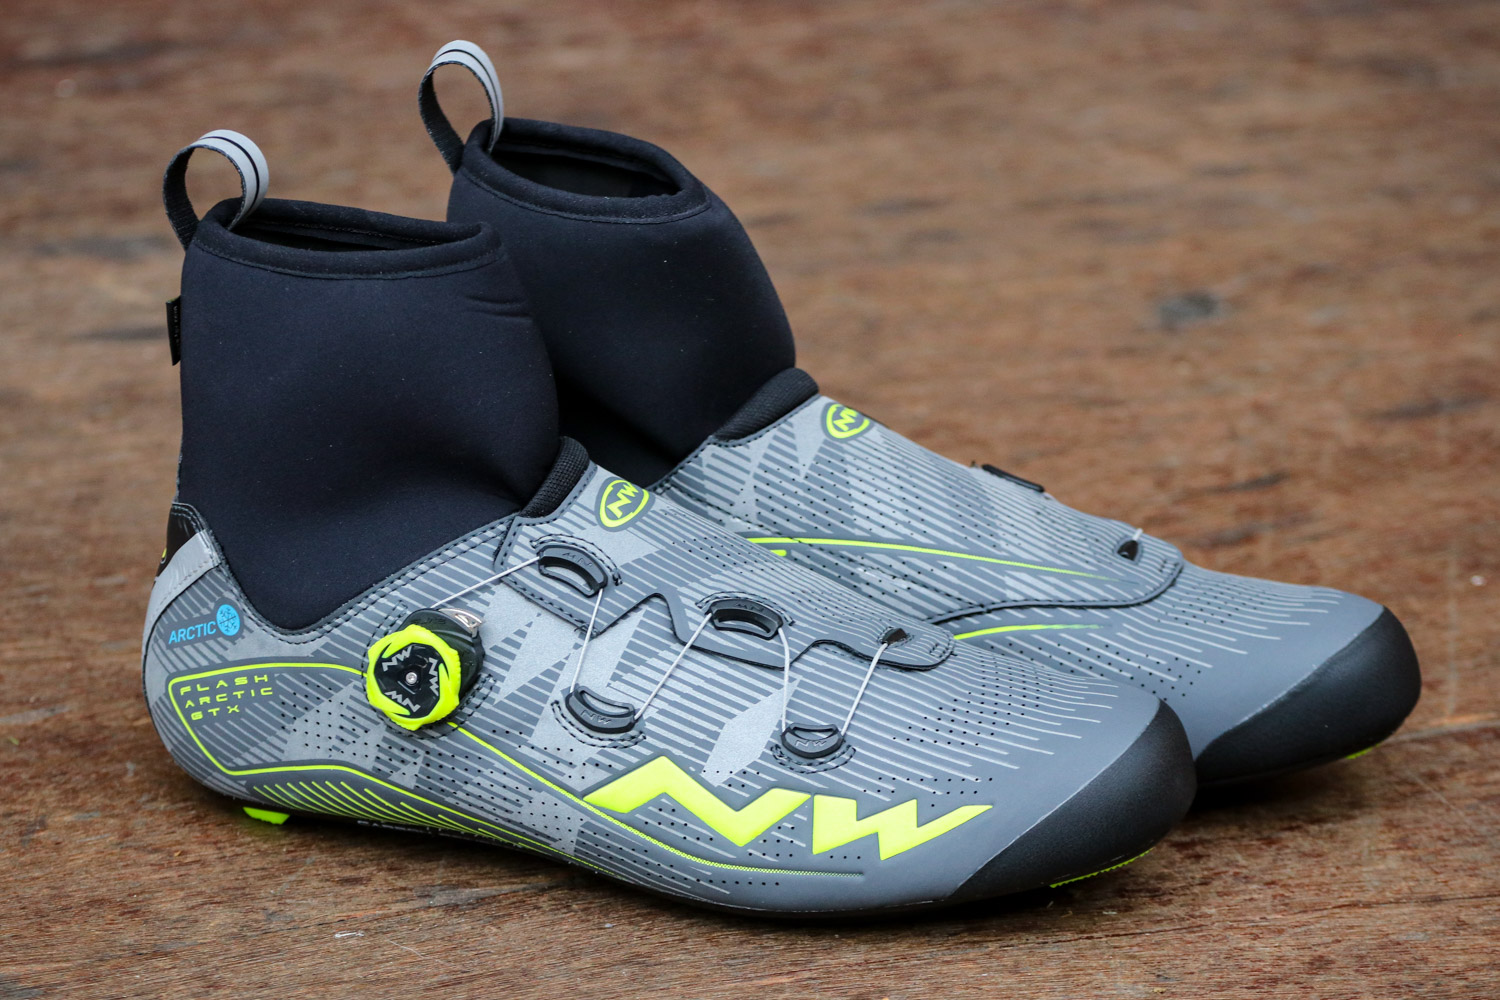 northwave winter road shoes